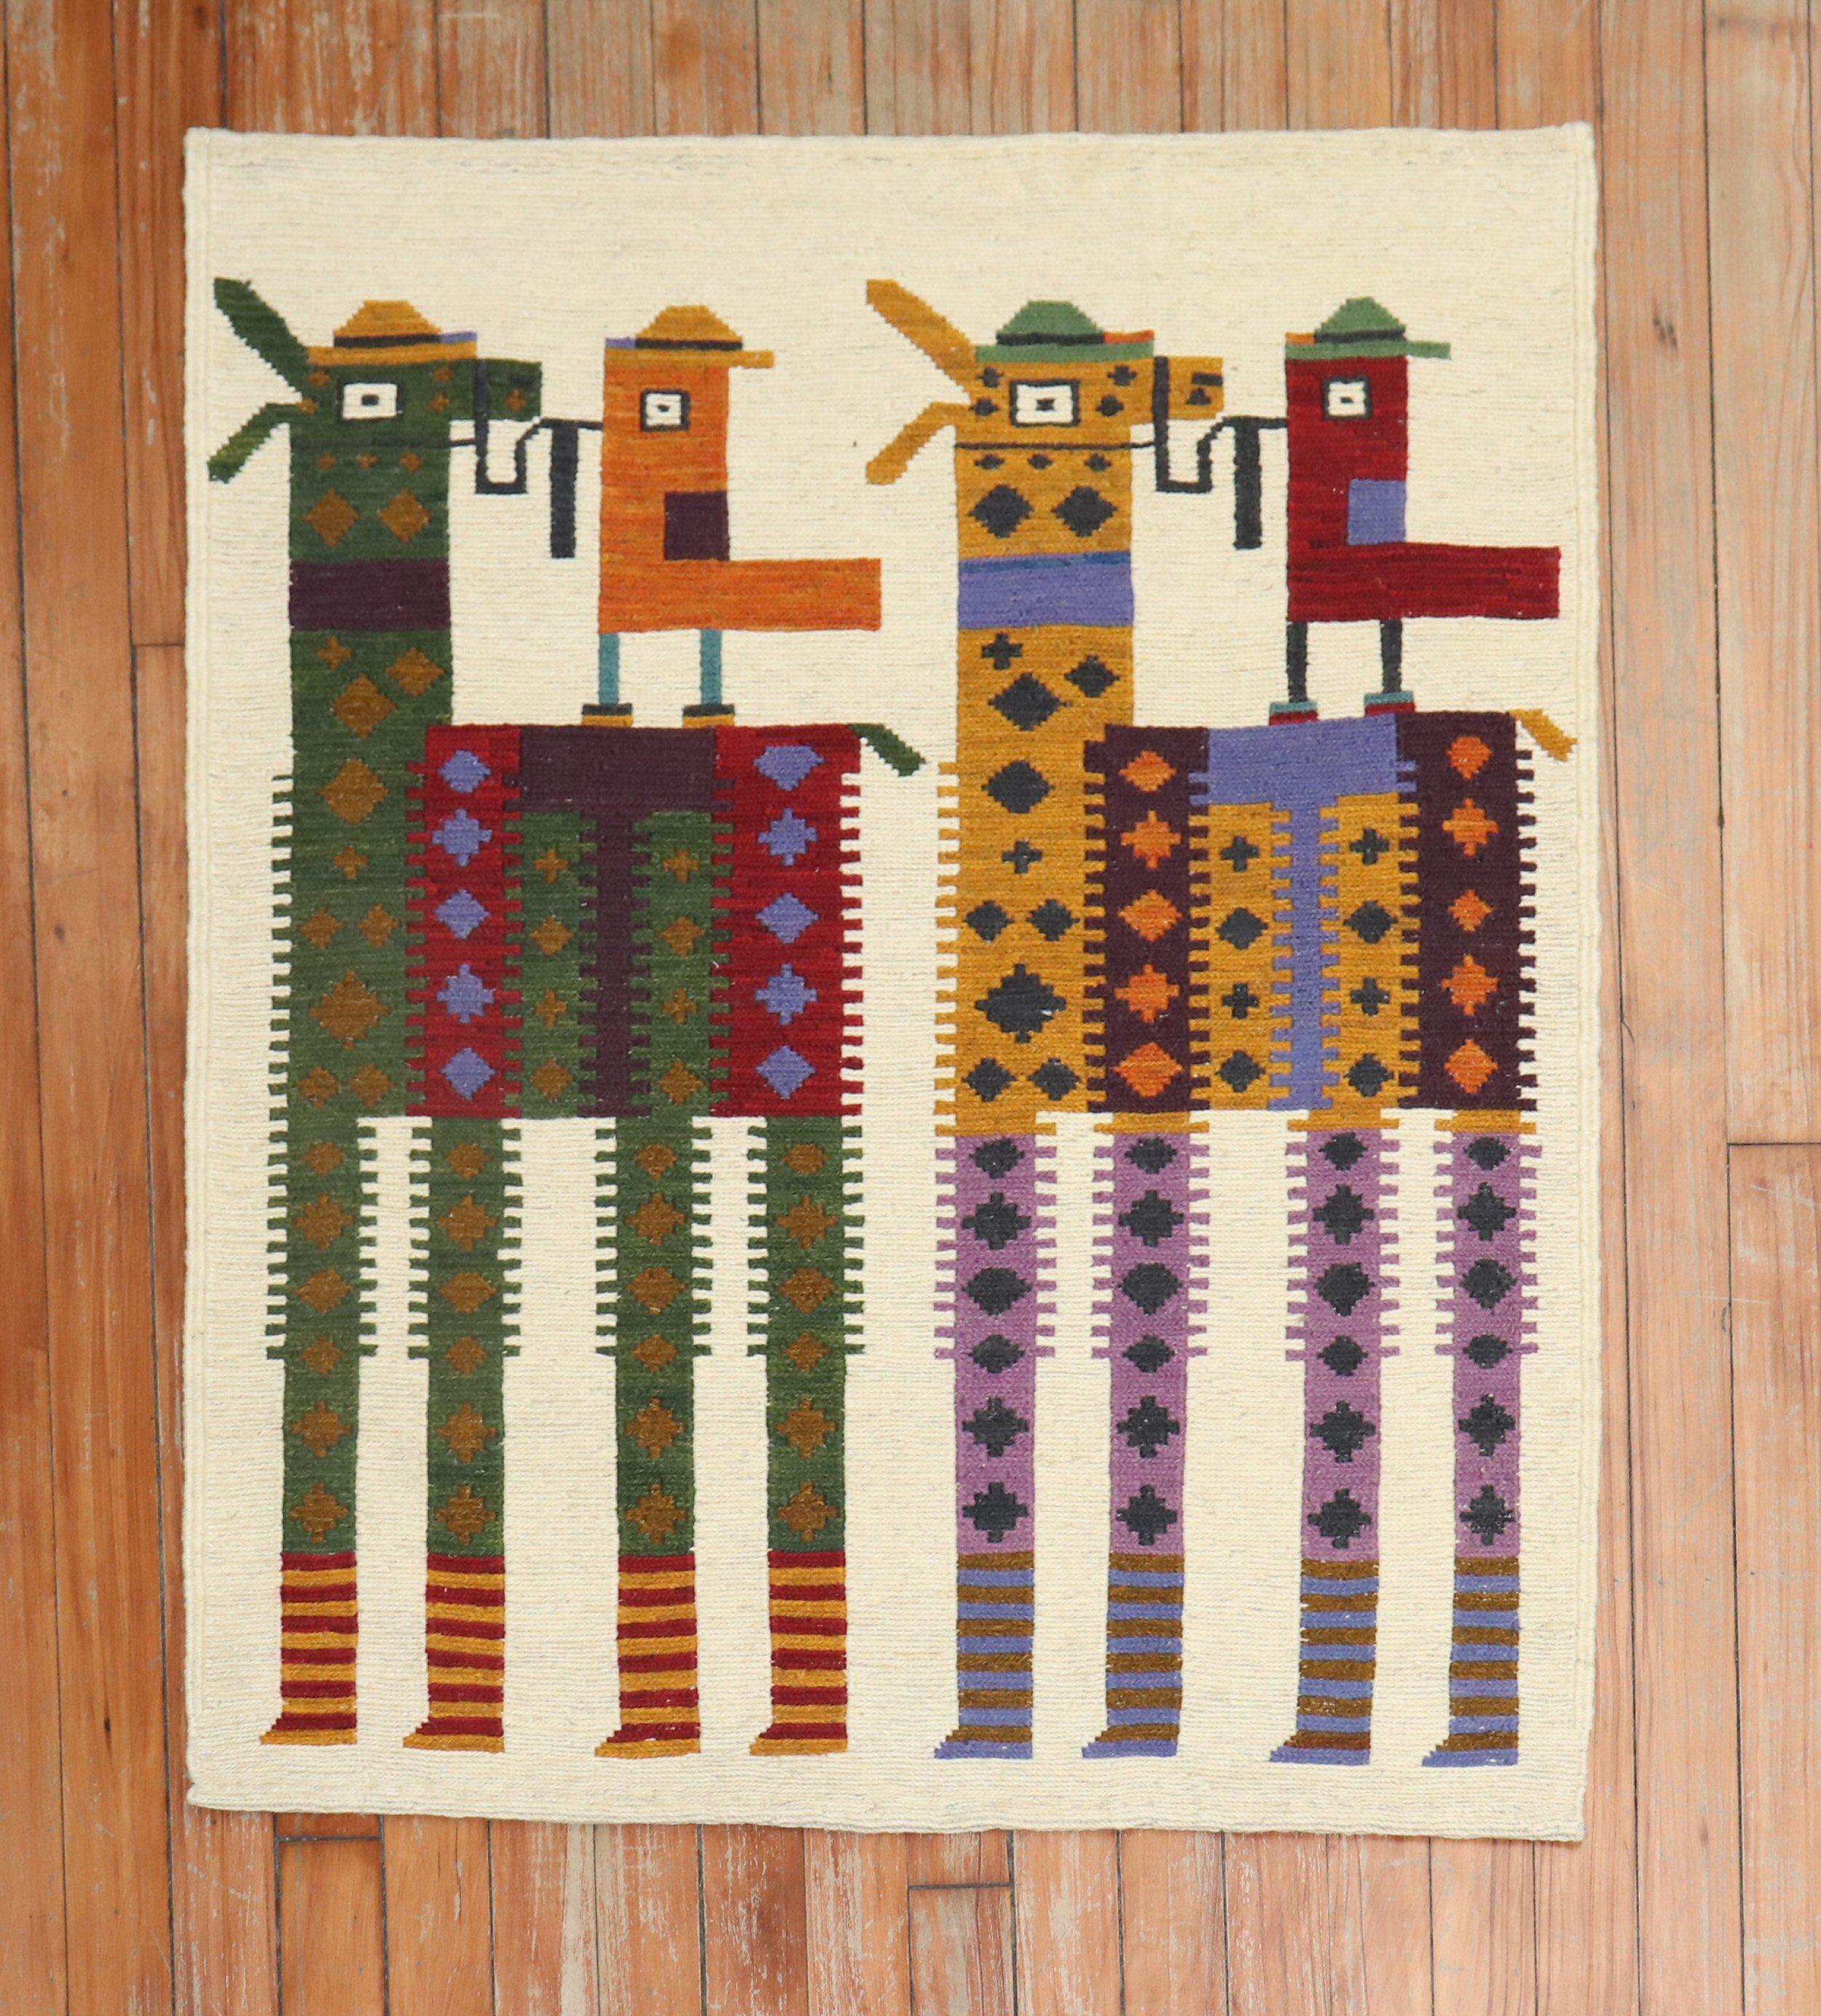 Scatter square size Persian Kilim from the late 20th century with 2 colorful baby giraffes and birds on a beige field.

Measures: 2'7'' x 3'.

This was originally belonging to a private Persian collector who requested to make a custom collection